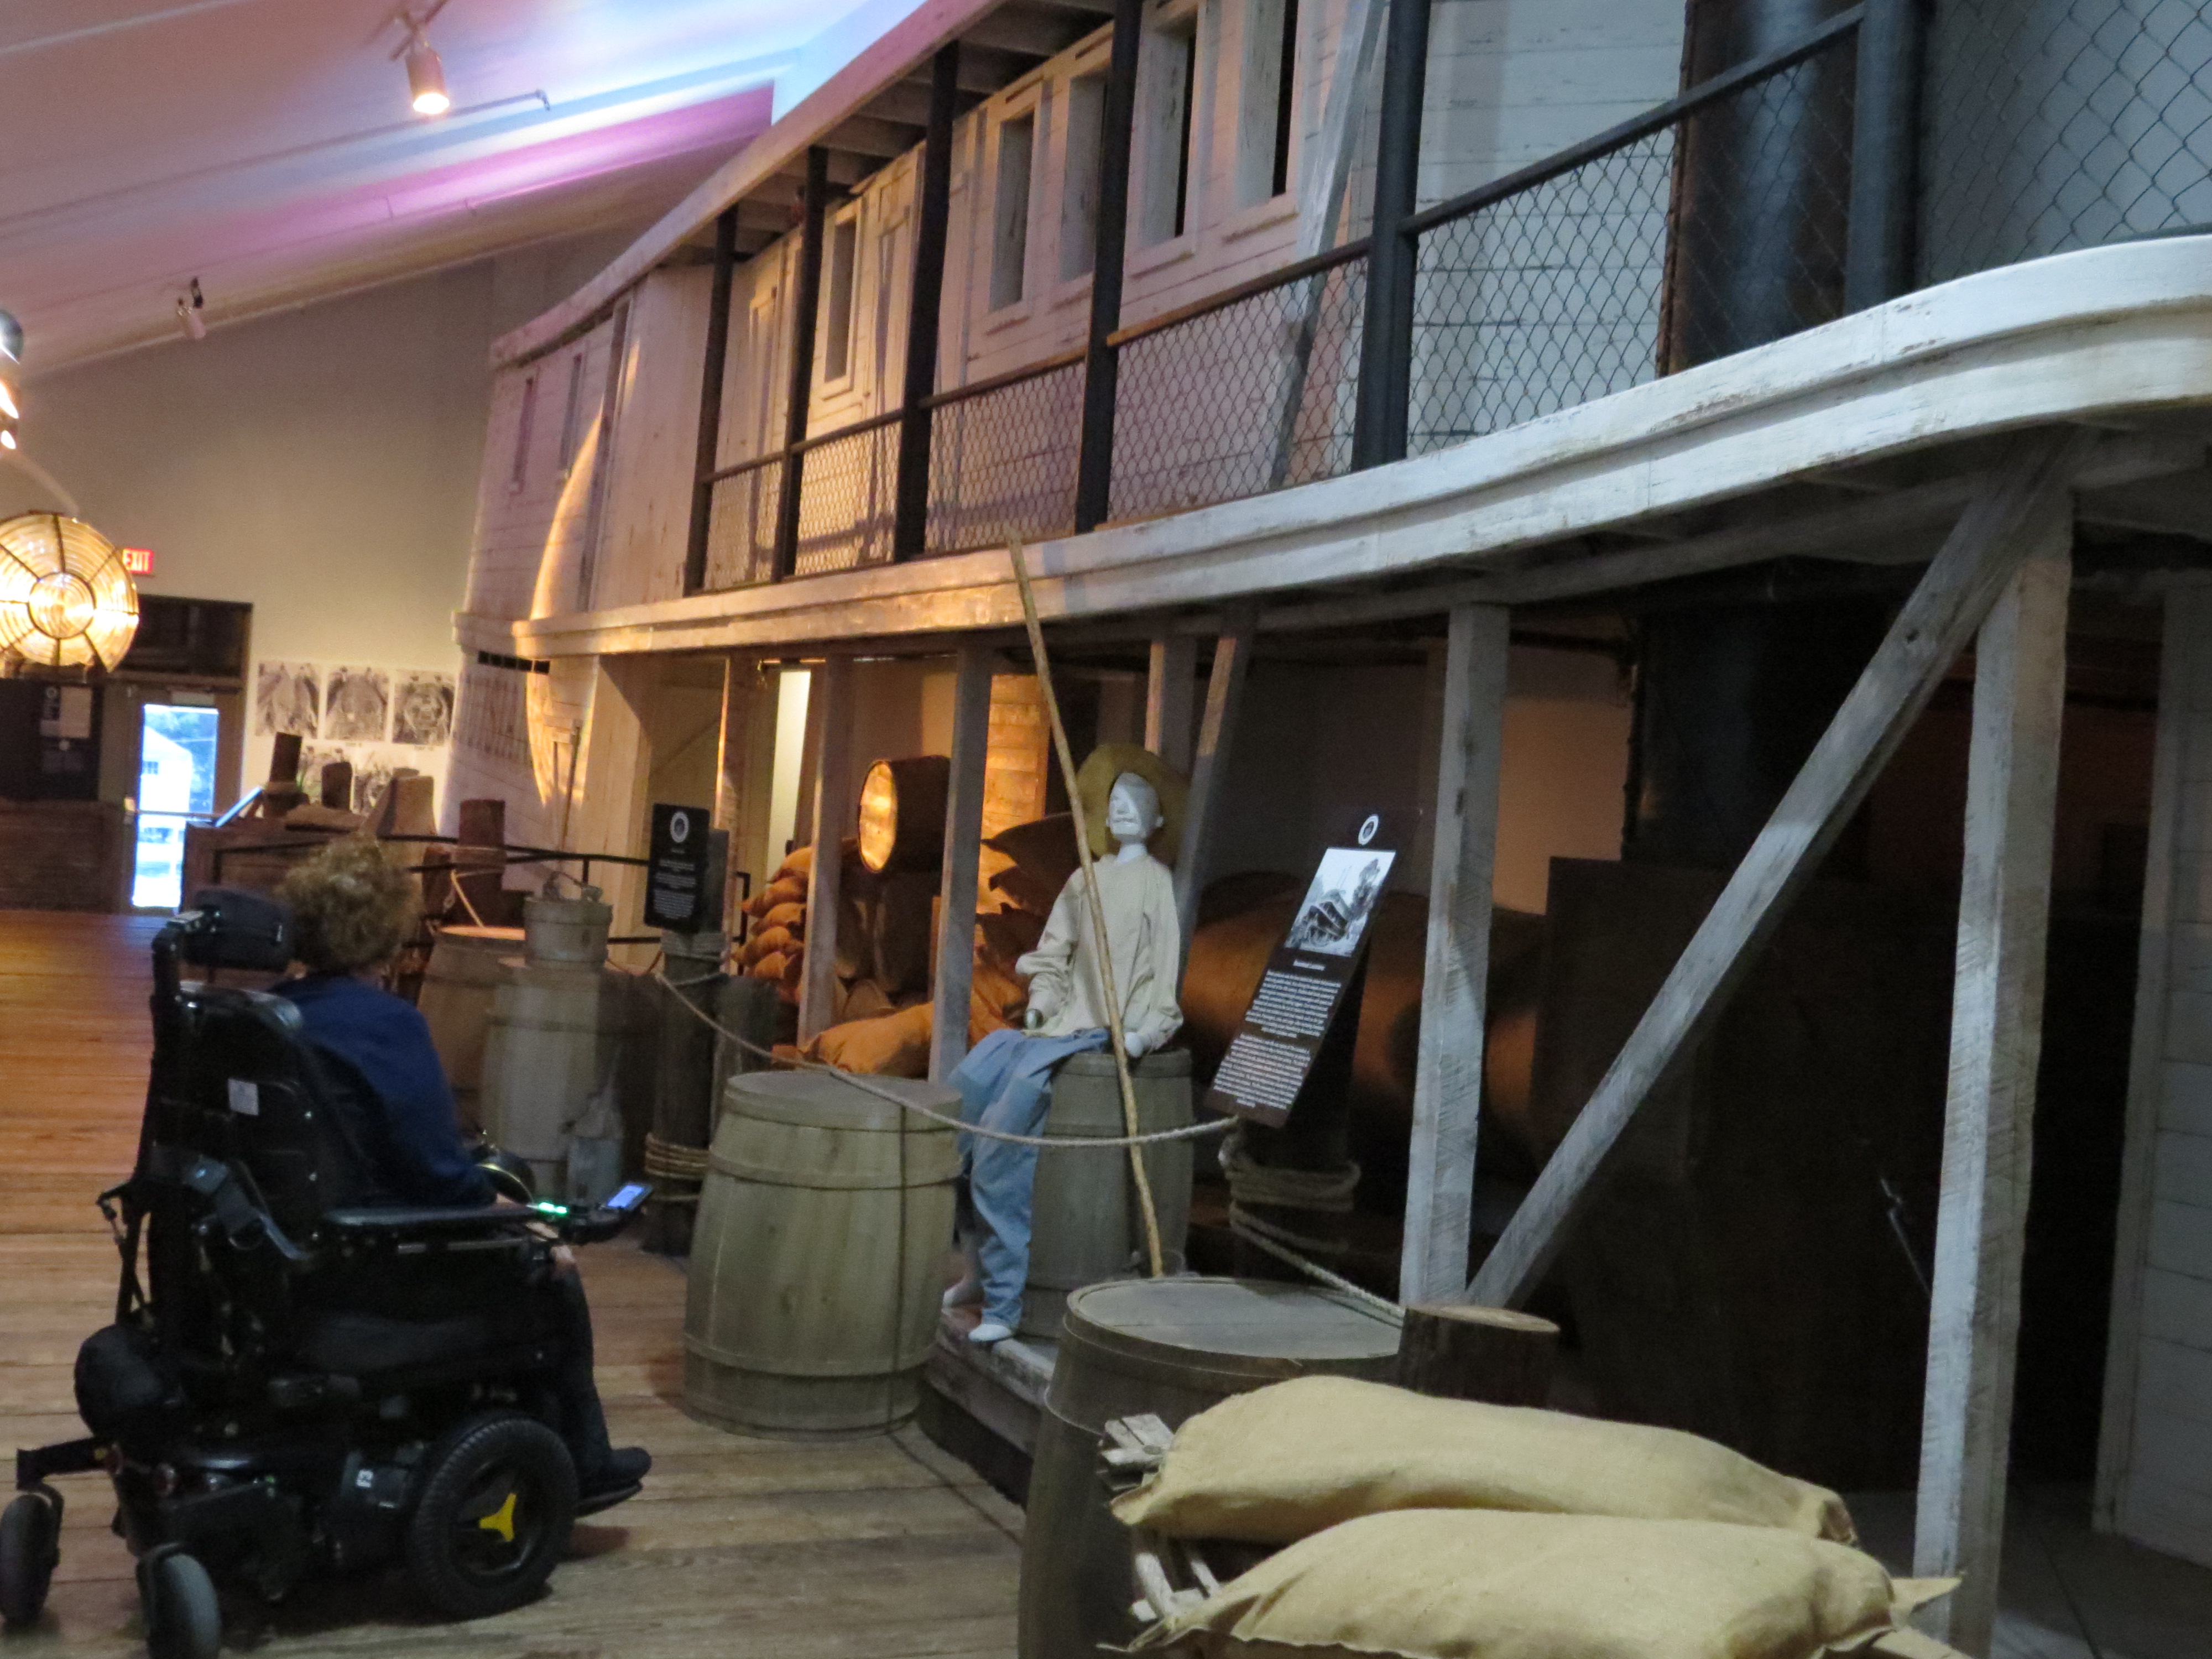 A women in a wheelchair viewing an exhibit at the Lake Pontchartrain Basin Maritime Museum